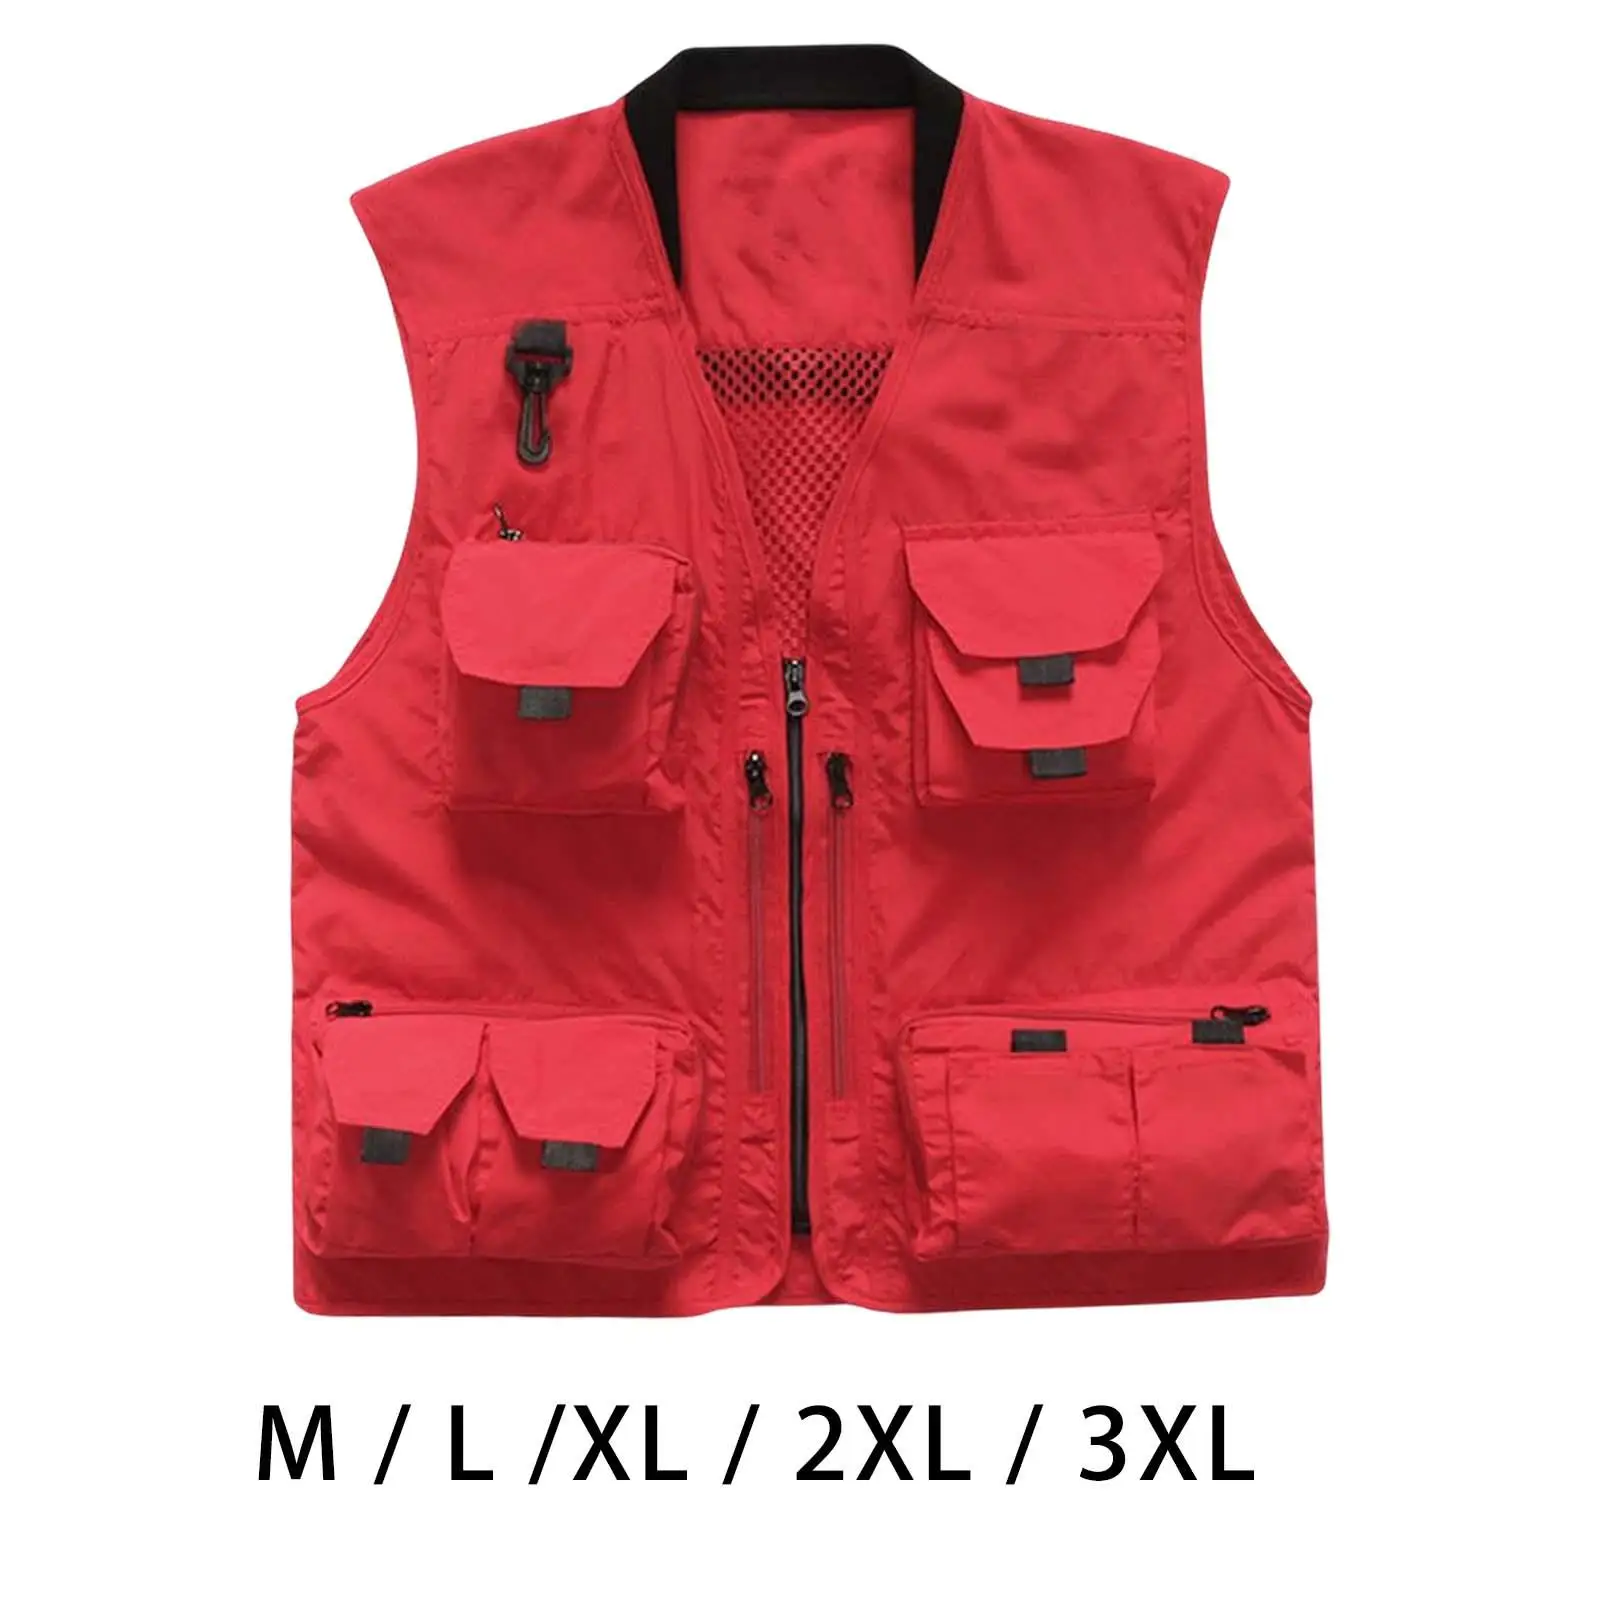 Men Fishing Vest Clothing Costume Waistcoat Mesh Zipper with Pockets Casual Jacket for Outdoor Activities Climbing Work Travel